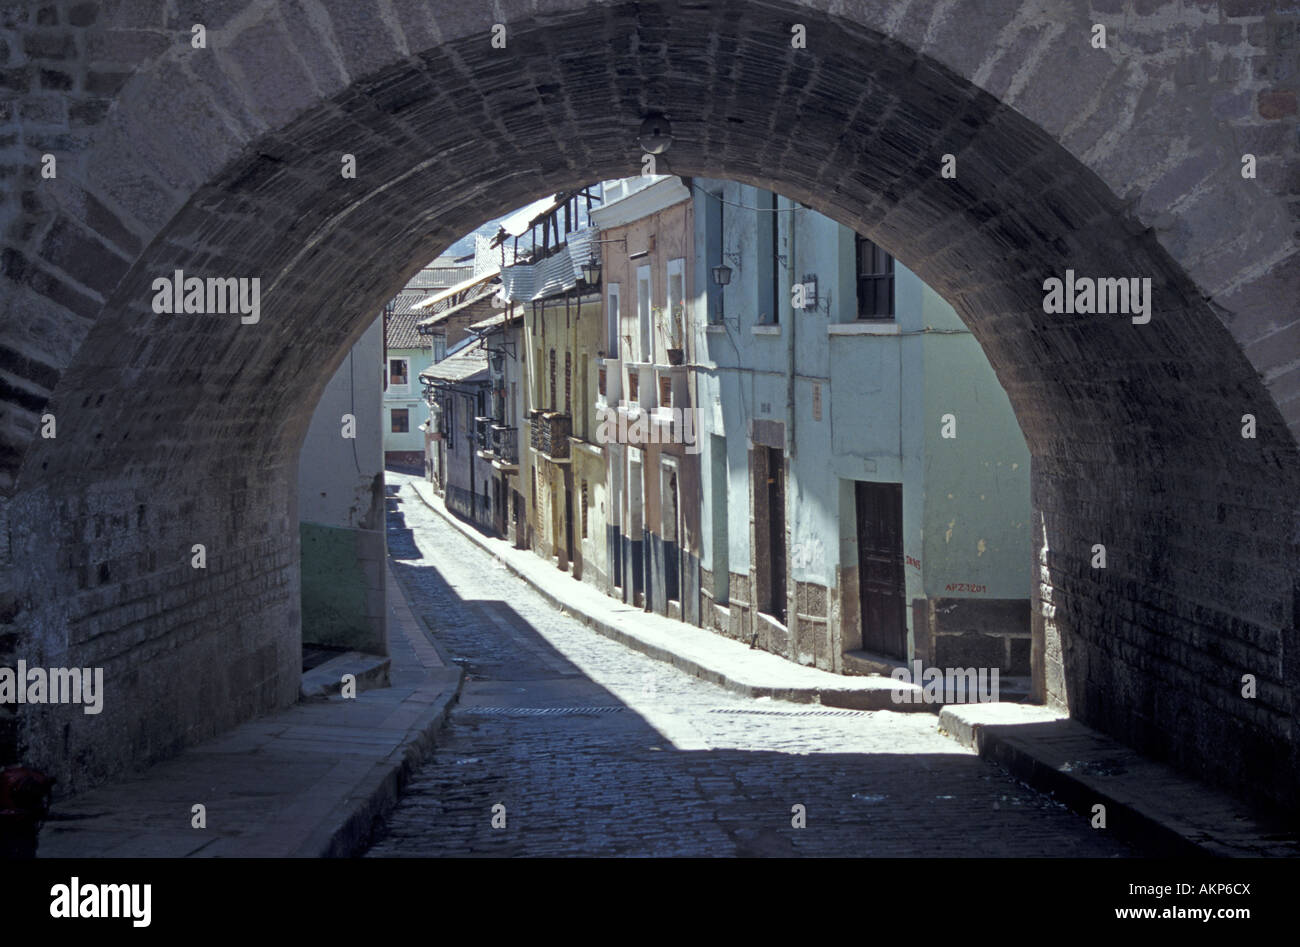 La Ronda alley framed by an arched bridge in in the Old Town, Quito, Ecuador Stock Photo